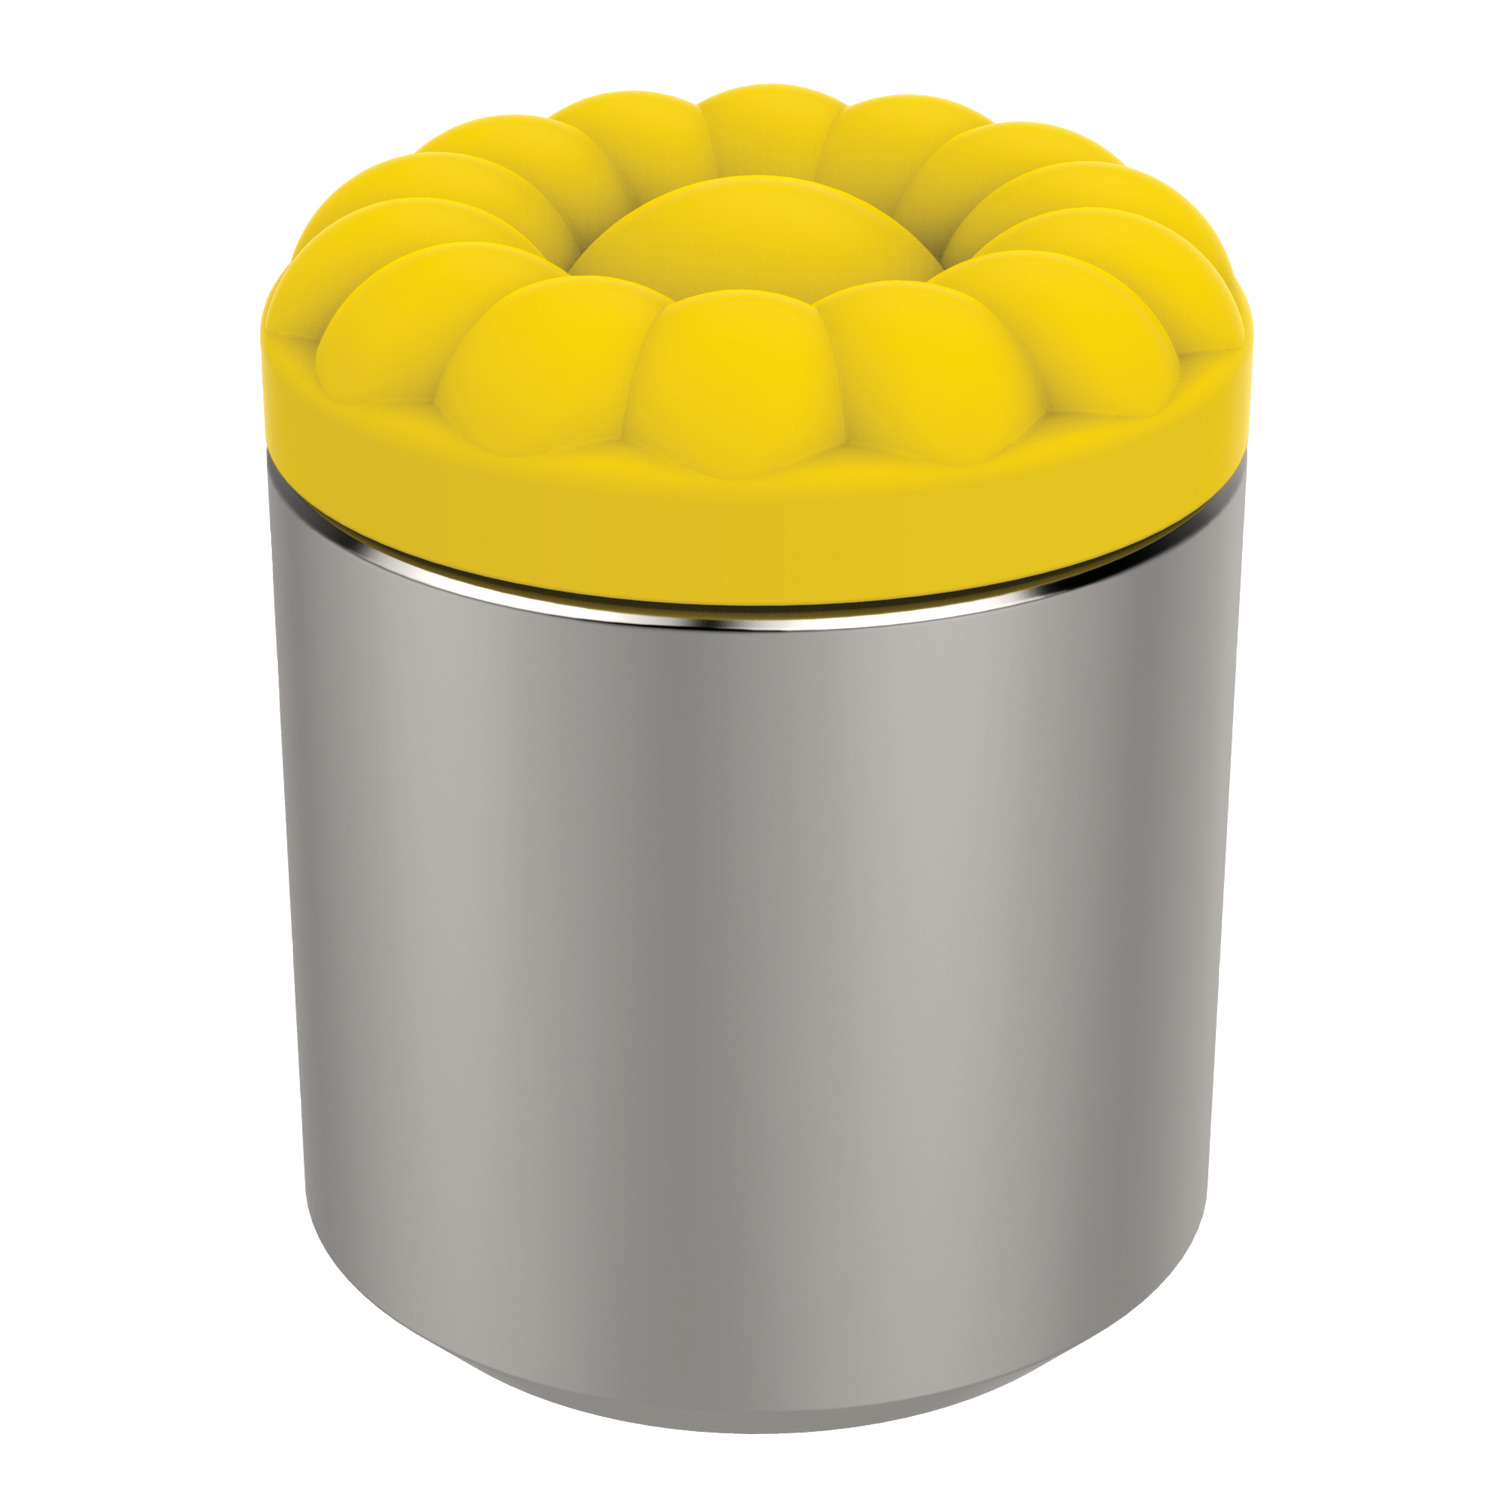 Grippers - Urethane Coated Urethane surface is permanently bonded to a 300 series stainless steel pad. The urethane provides excellent protection against damage on delicate work surfaces. Tapped hole mounting.